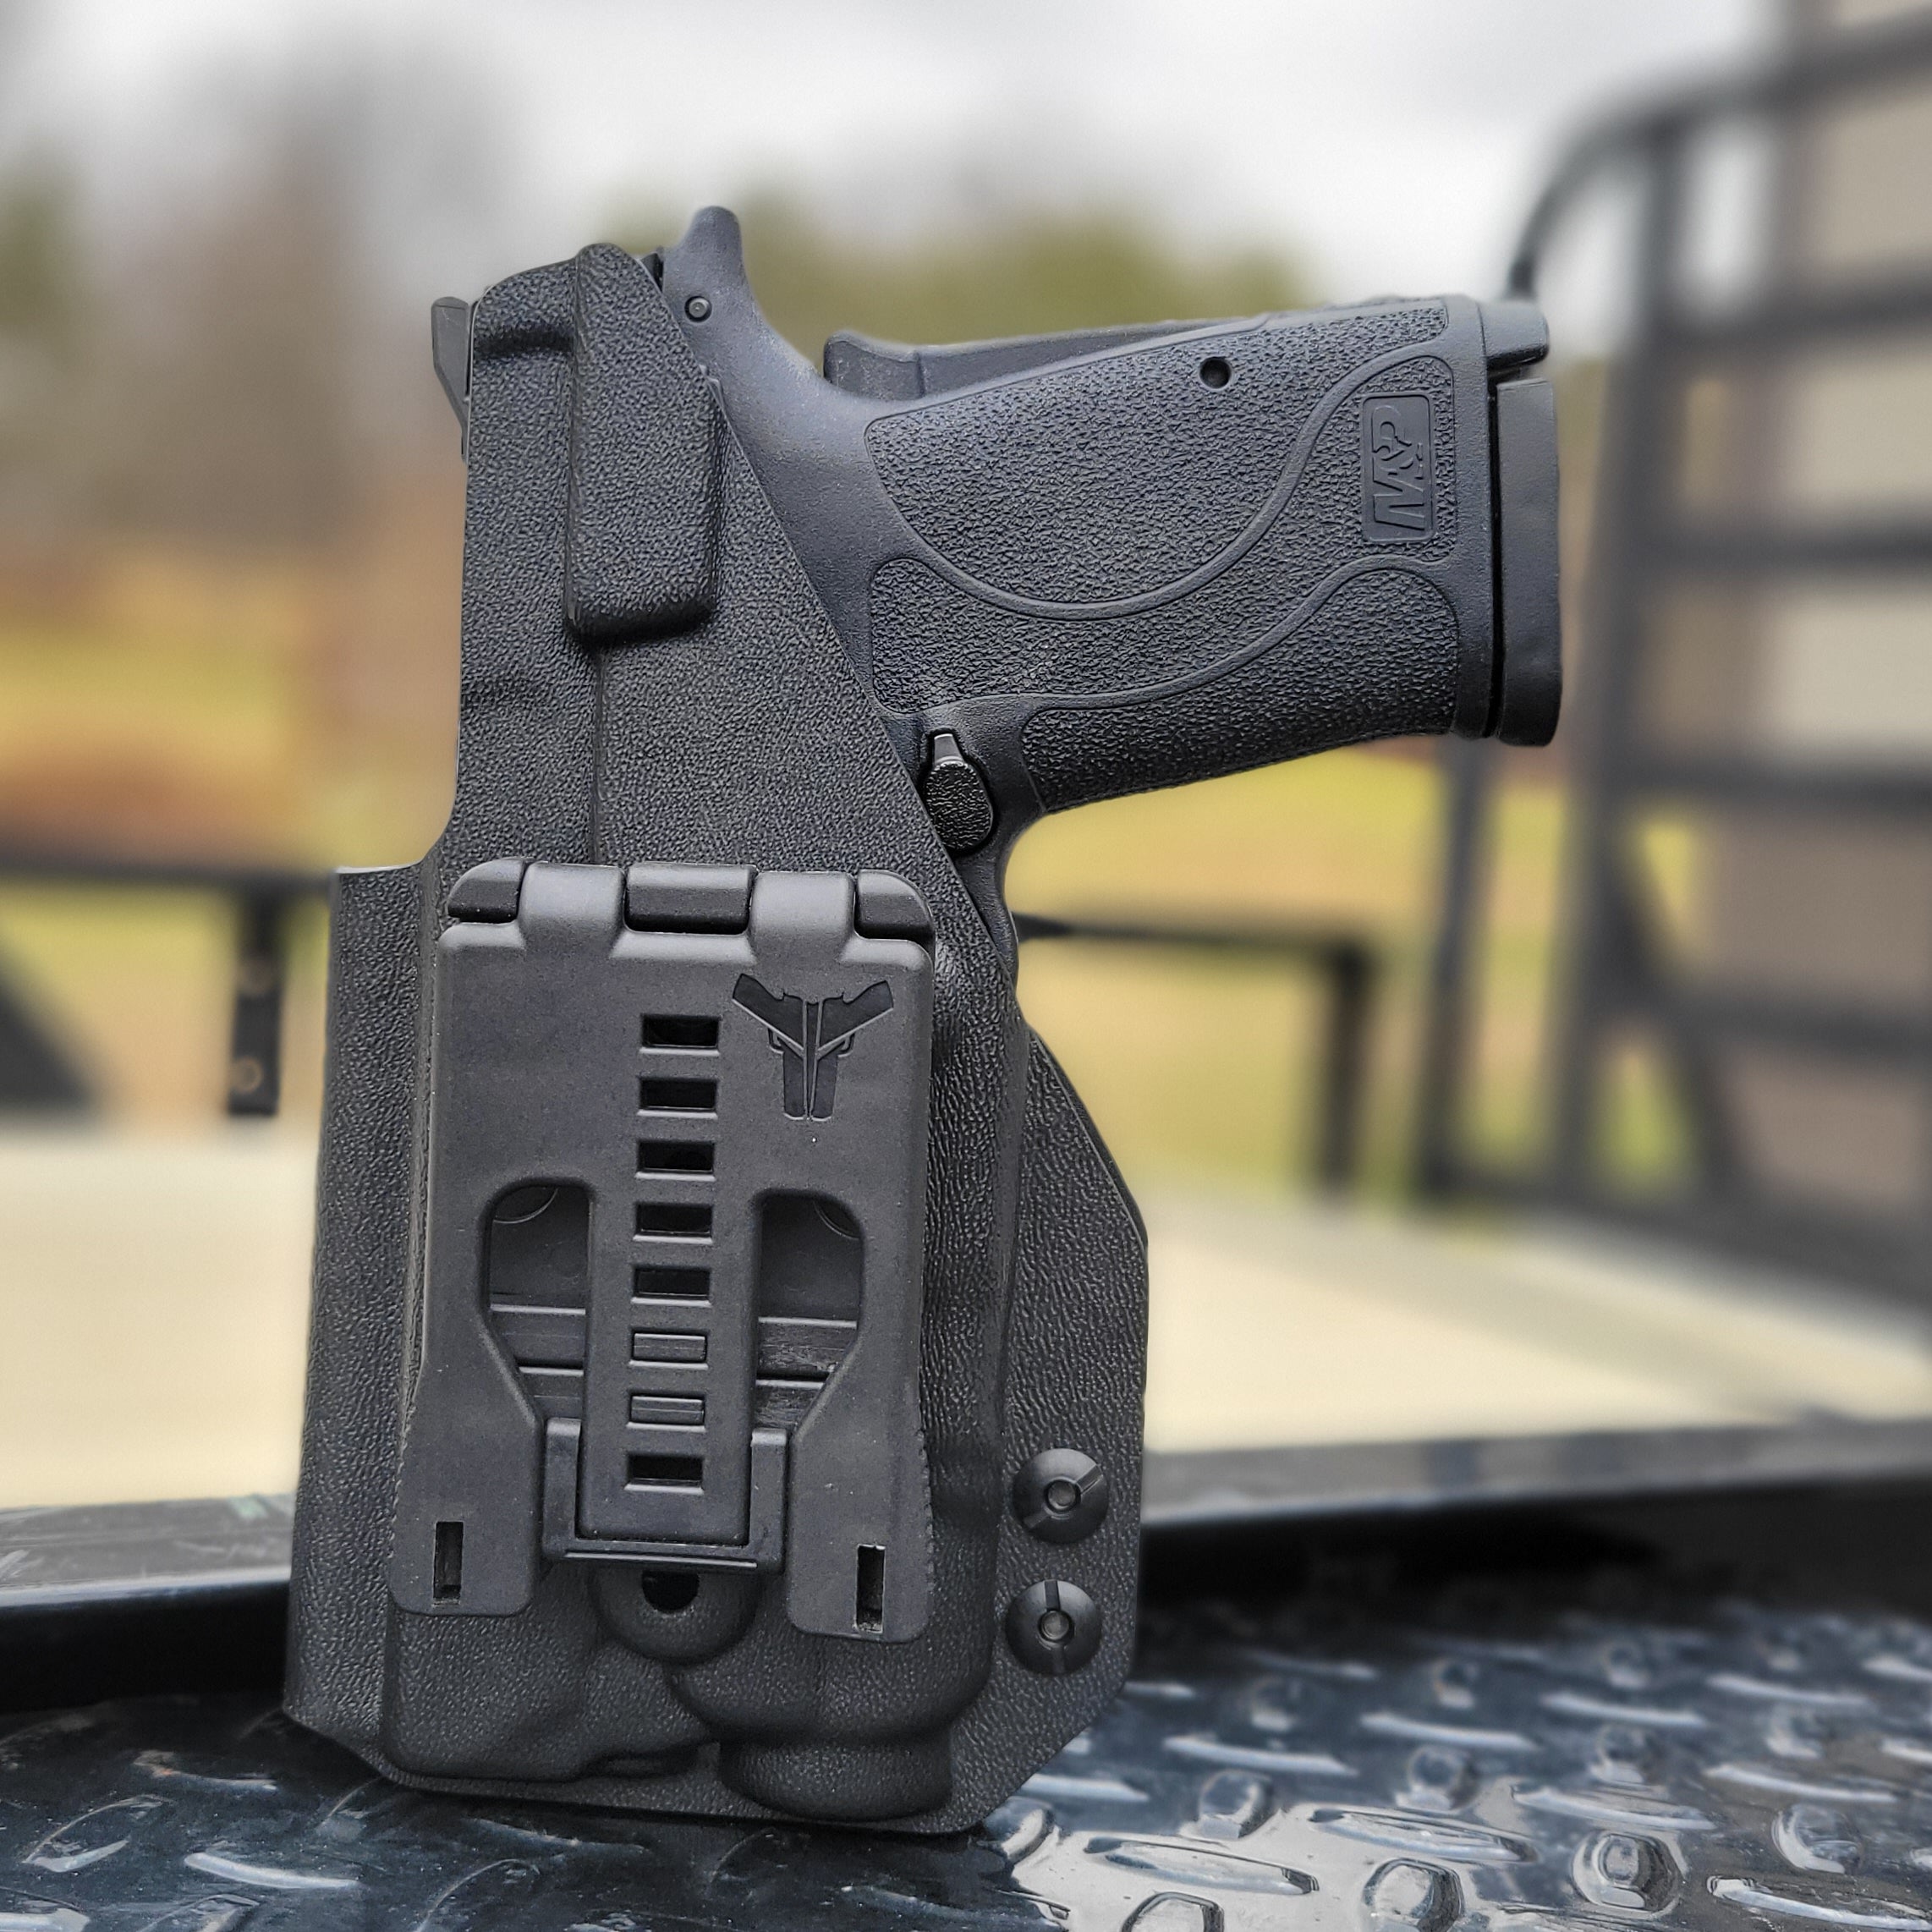 For the best Outside Waistband Kydex holster designed to fit the Smith & Wesson M&P 9 Shield EZ with Streamlight TLR-7 or TLR-7A weapon-mounted light, shop 4Bros. Full Sweat guard Adjustable Retention minimal material and smooth edges to reduce printing Thermoplastic Kydex for durability 9EZ EZ9 S&W Easy 9